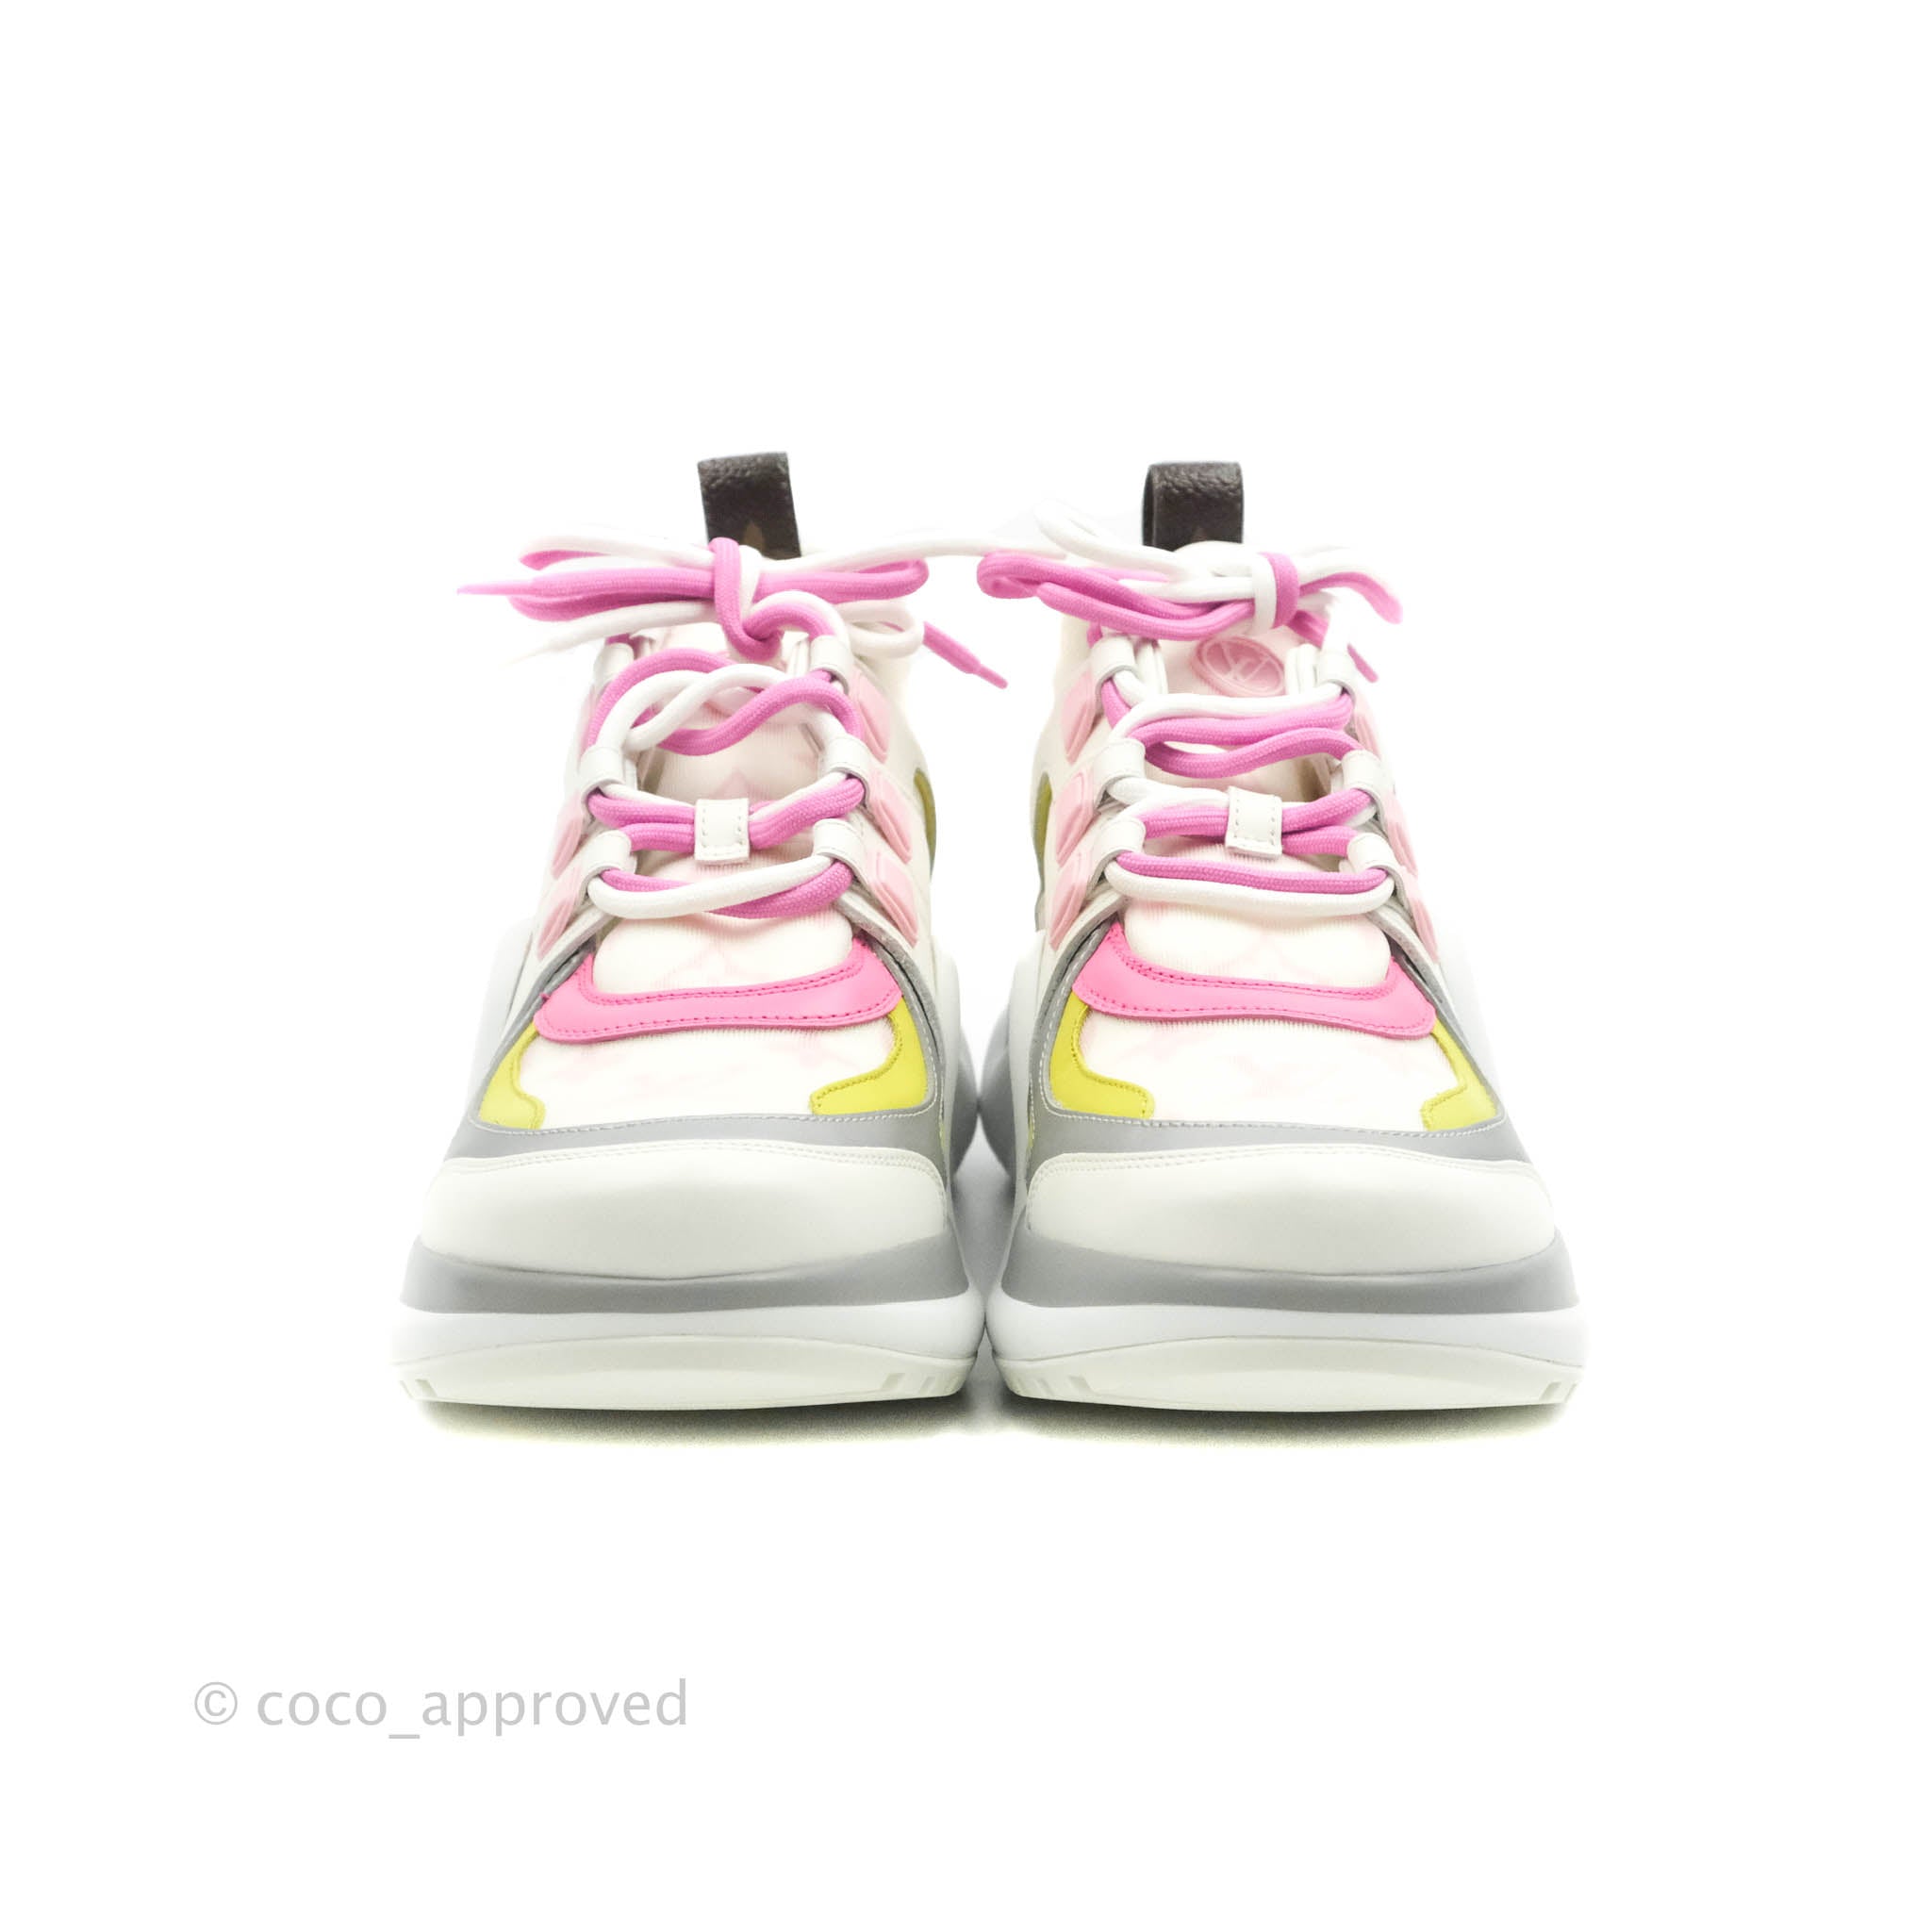 Louis Vuitton Archlight Sneakers Rose Clair Pink & White Size 38